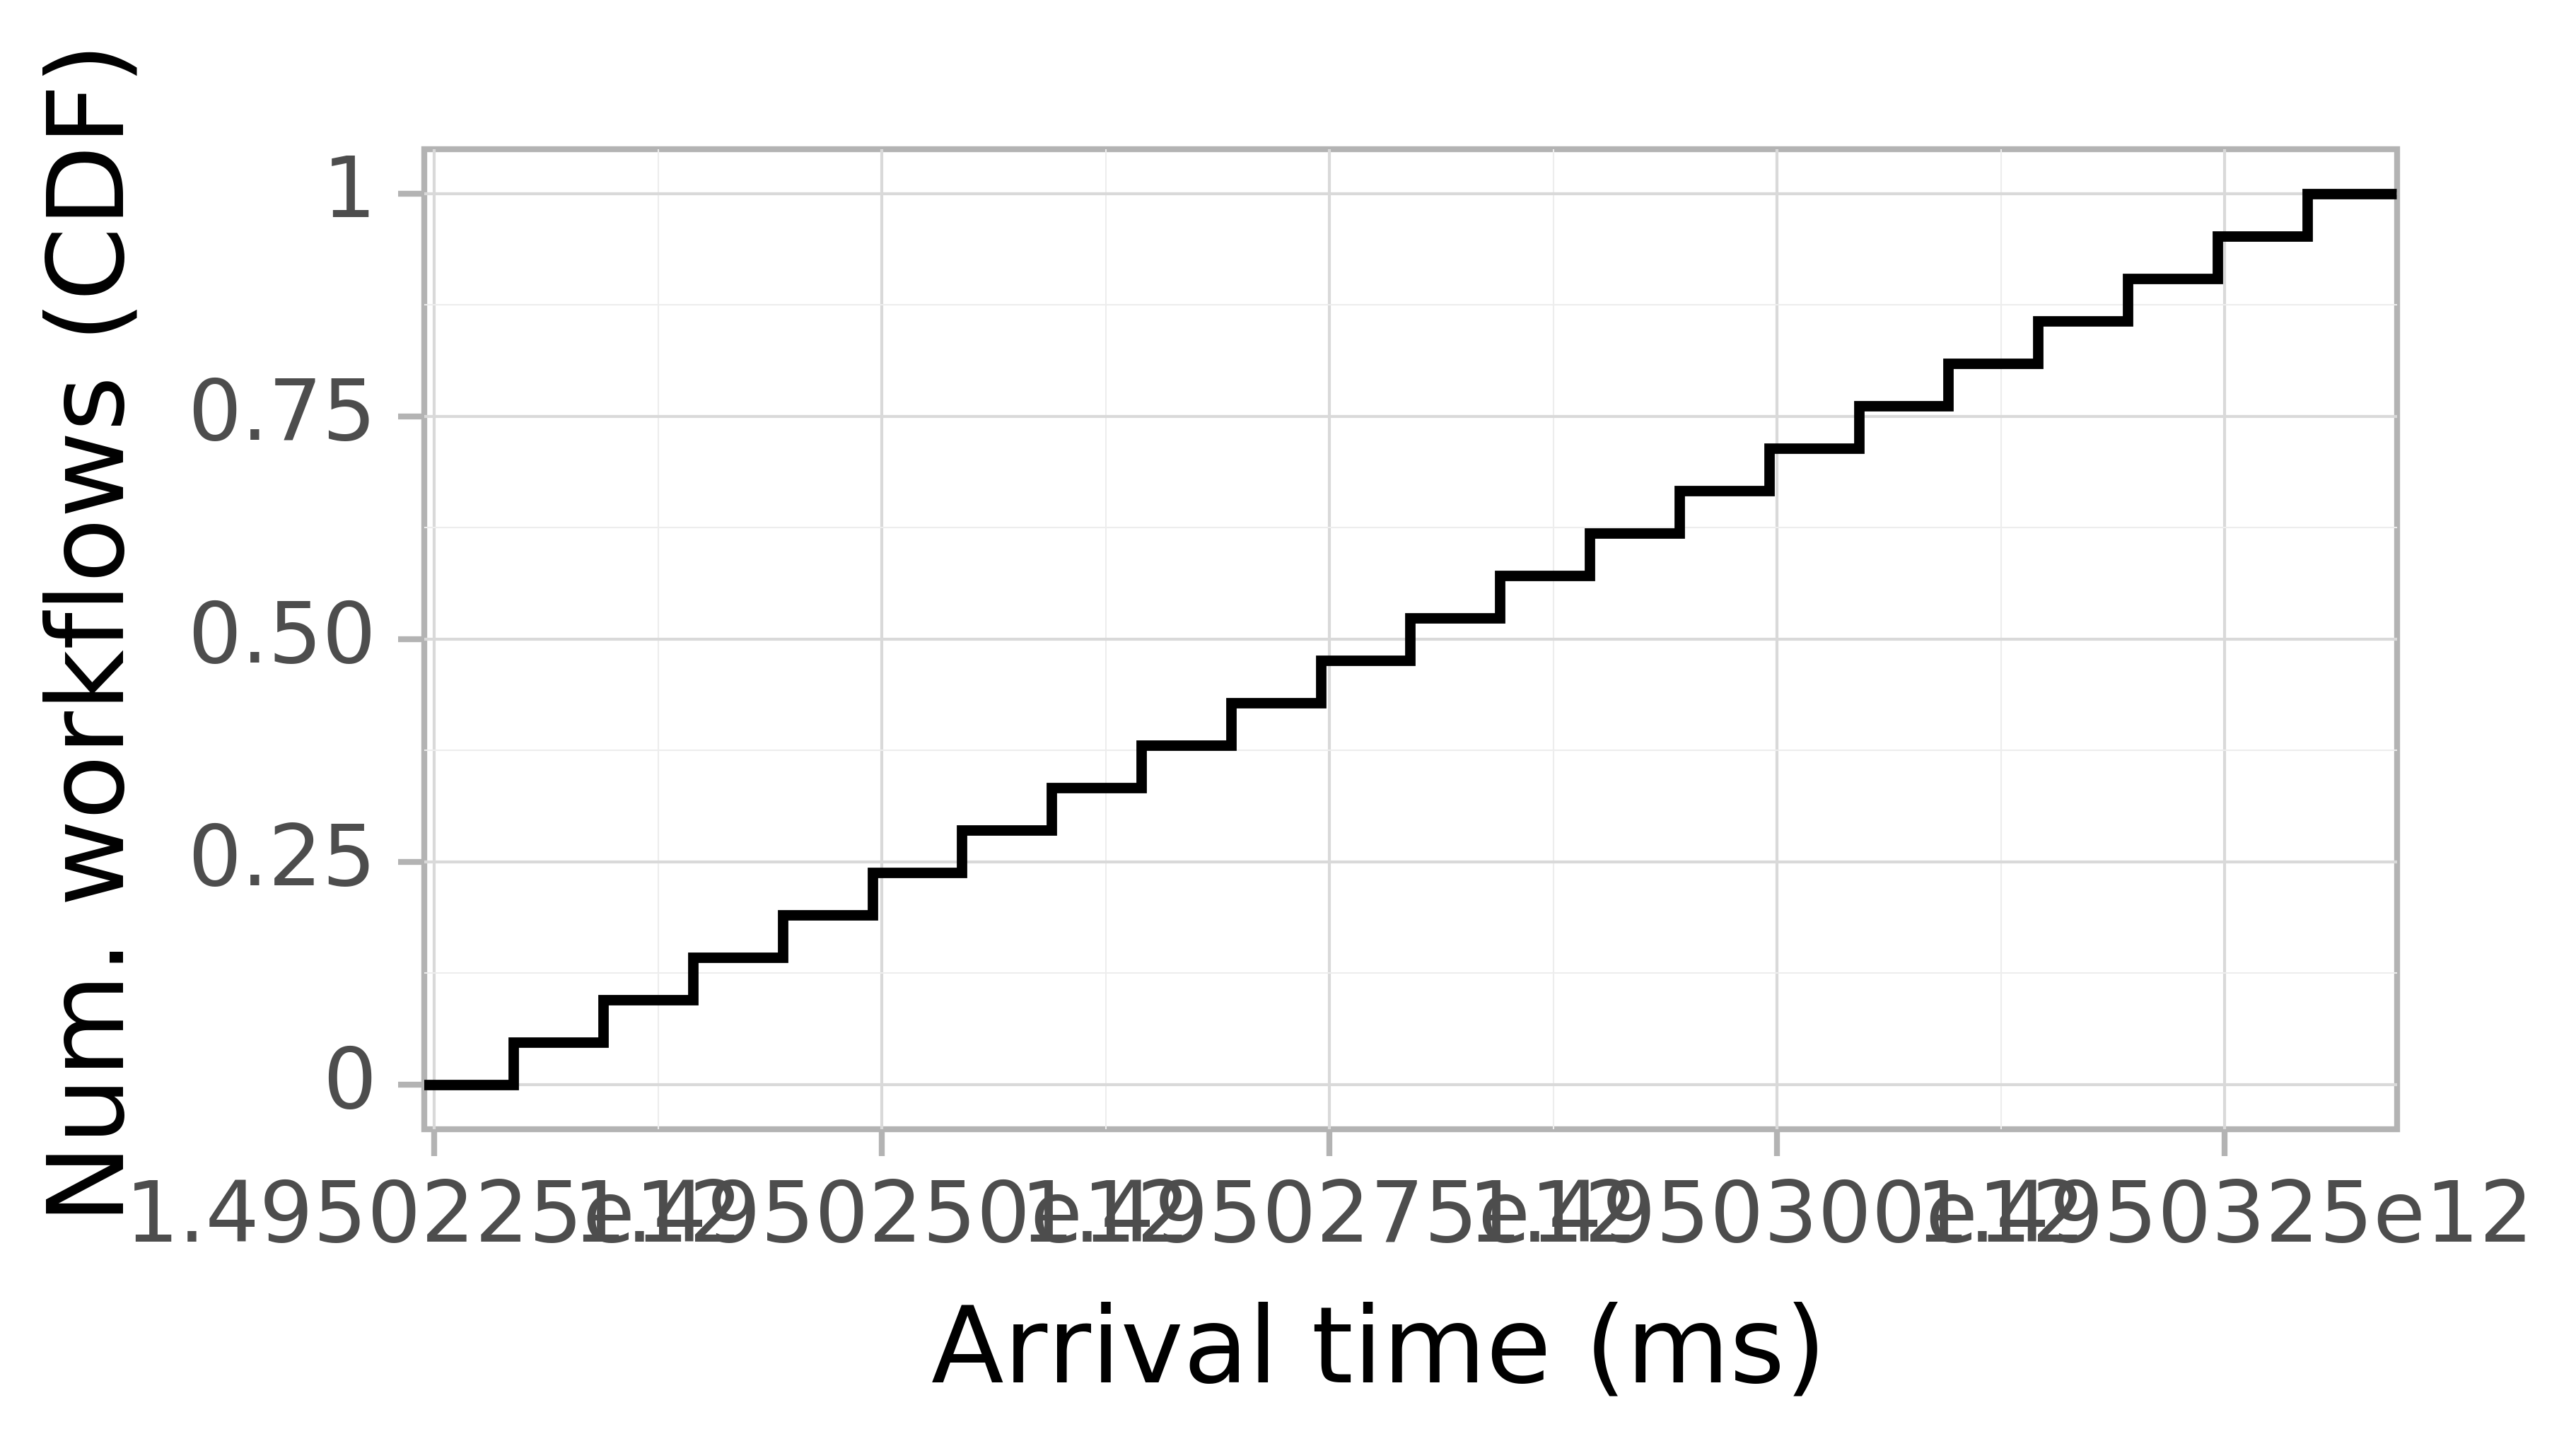 Job arrival CDF graph for the askalon-new_ee60 trace.